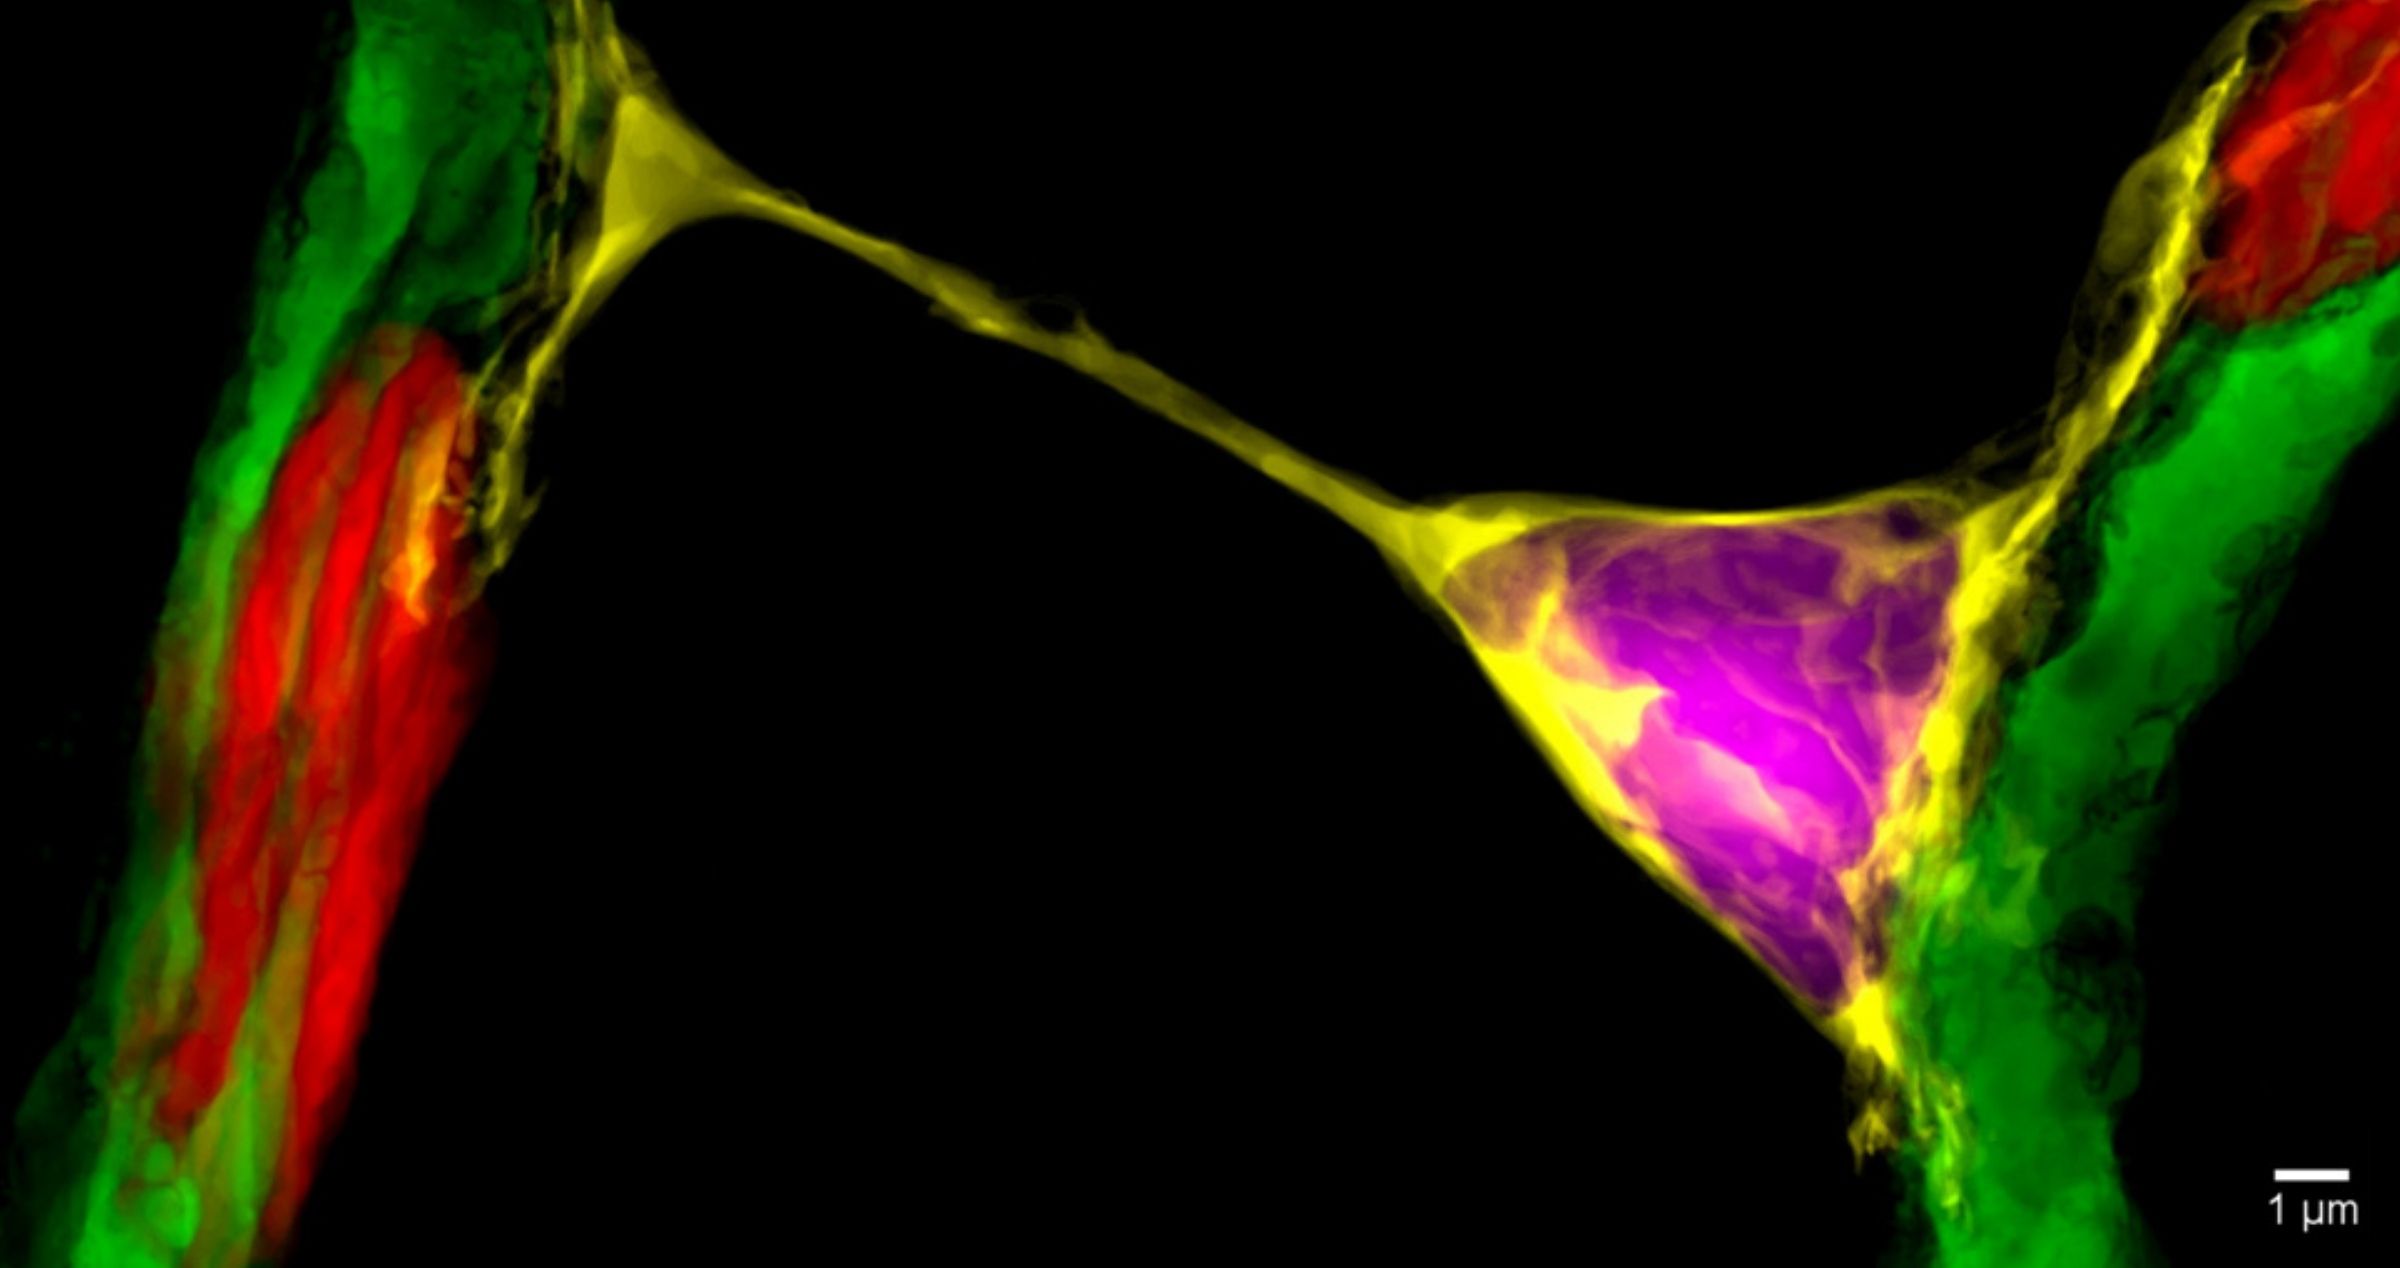 Close up digitised image of treated ganglion cells